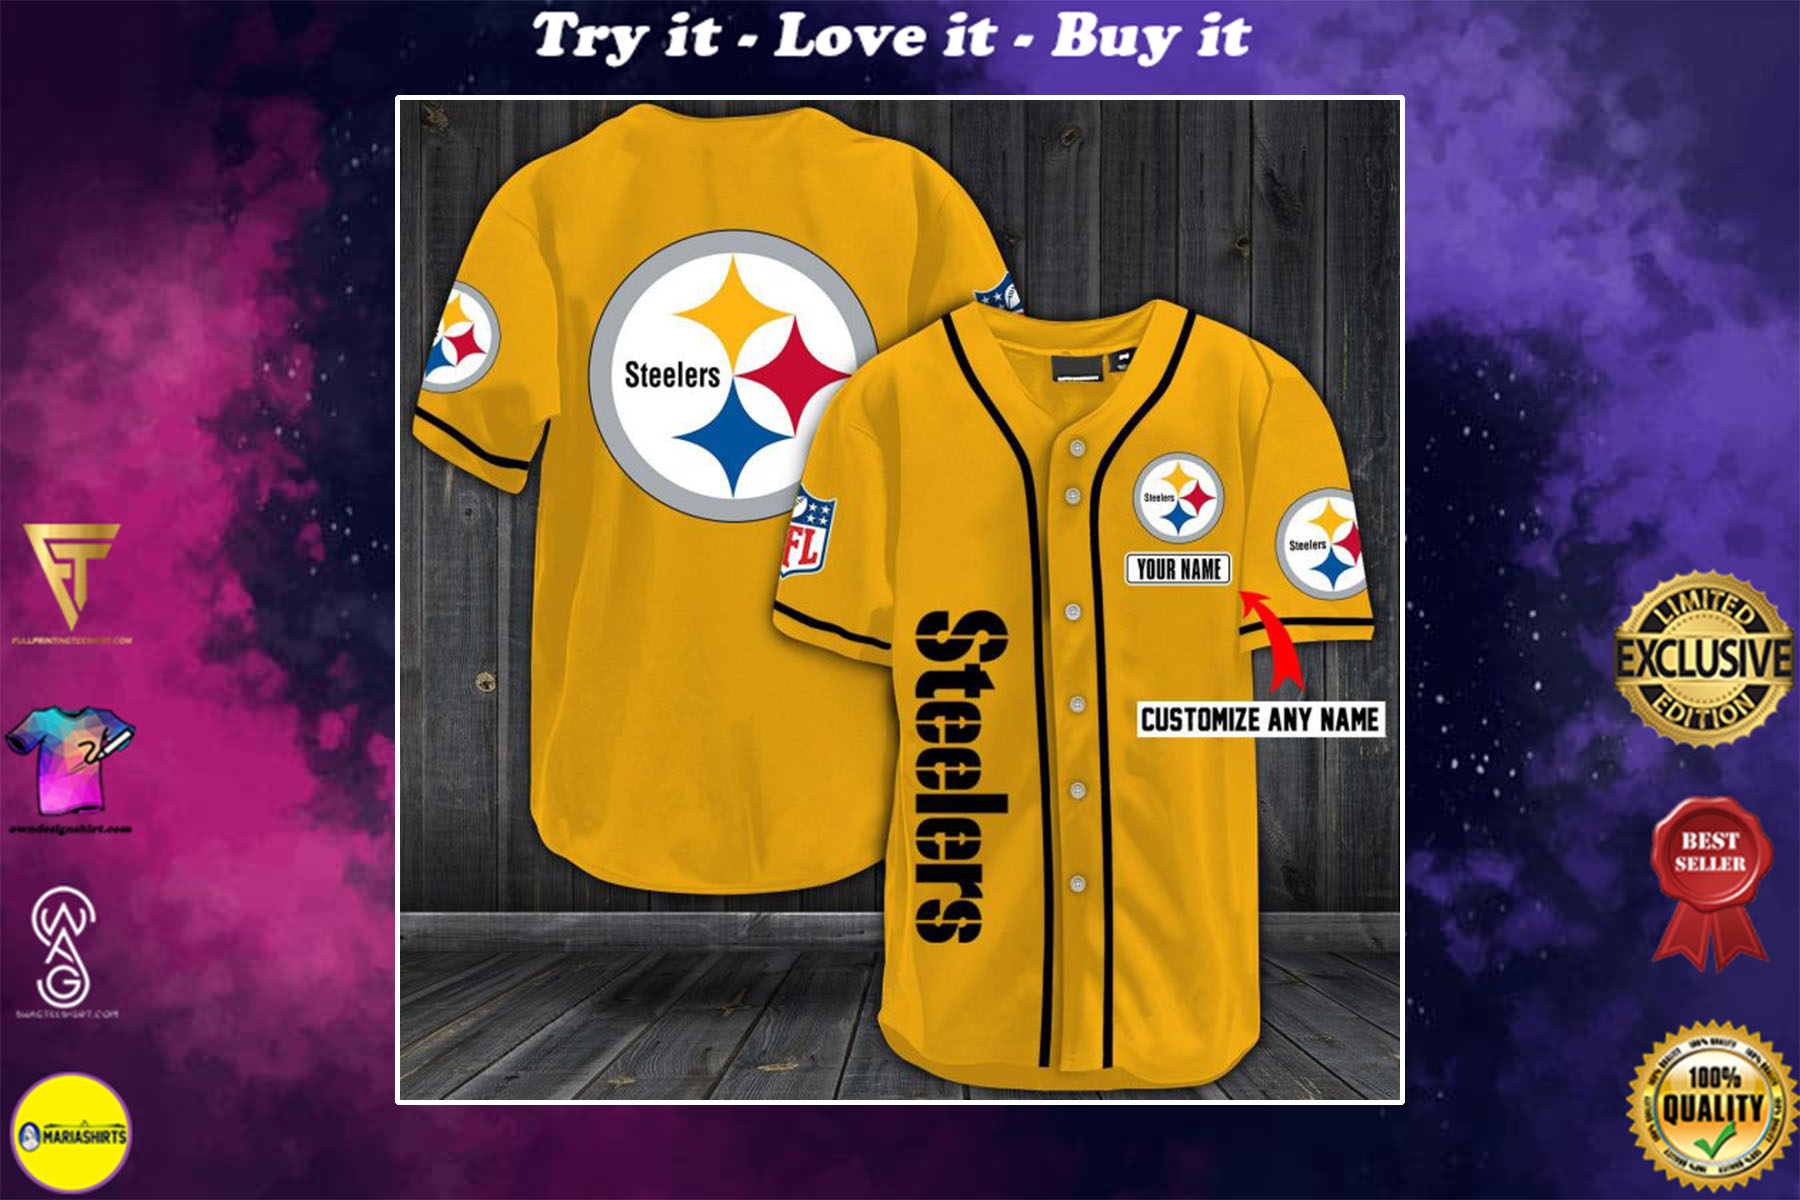 personalized name jersey pittsburgh steelers shirt